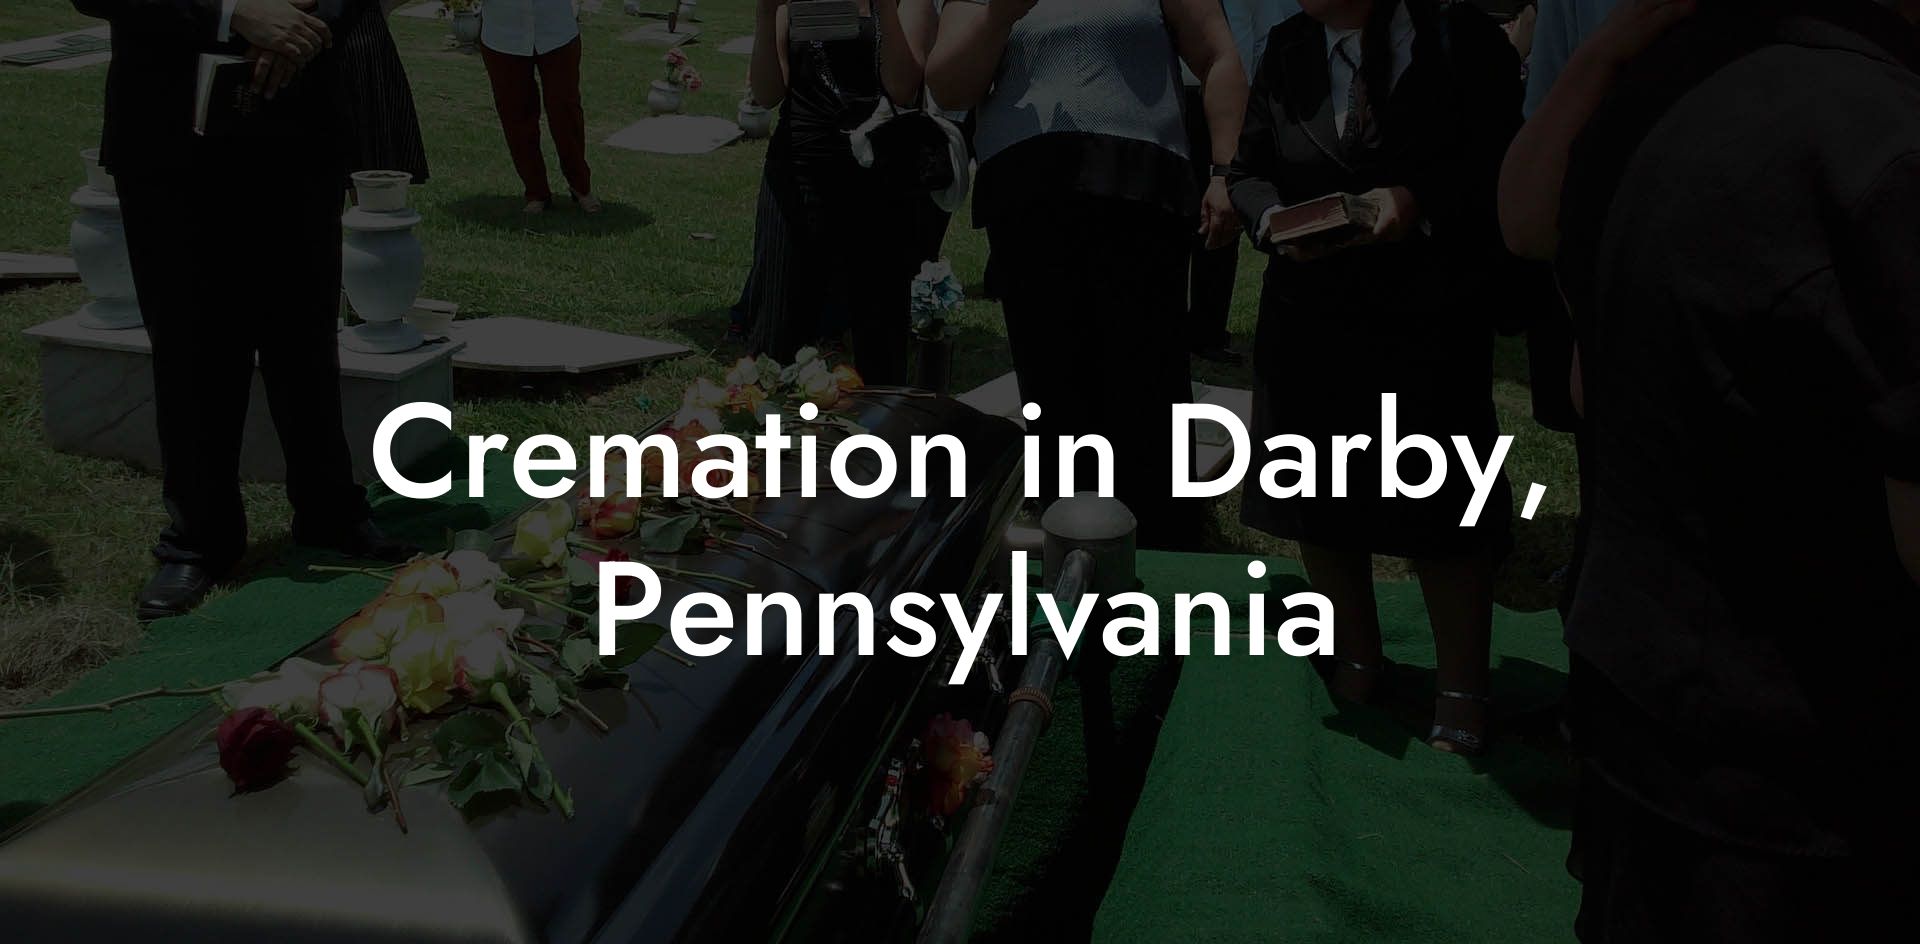 Cremation in Darby, Pennsylvania